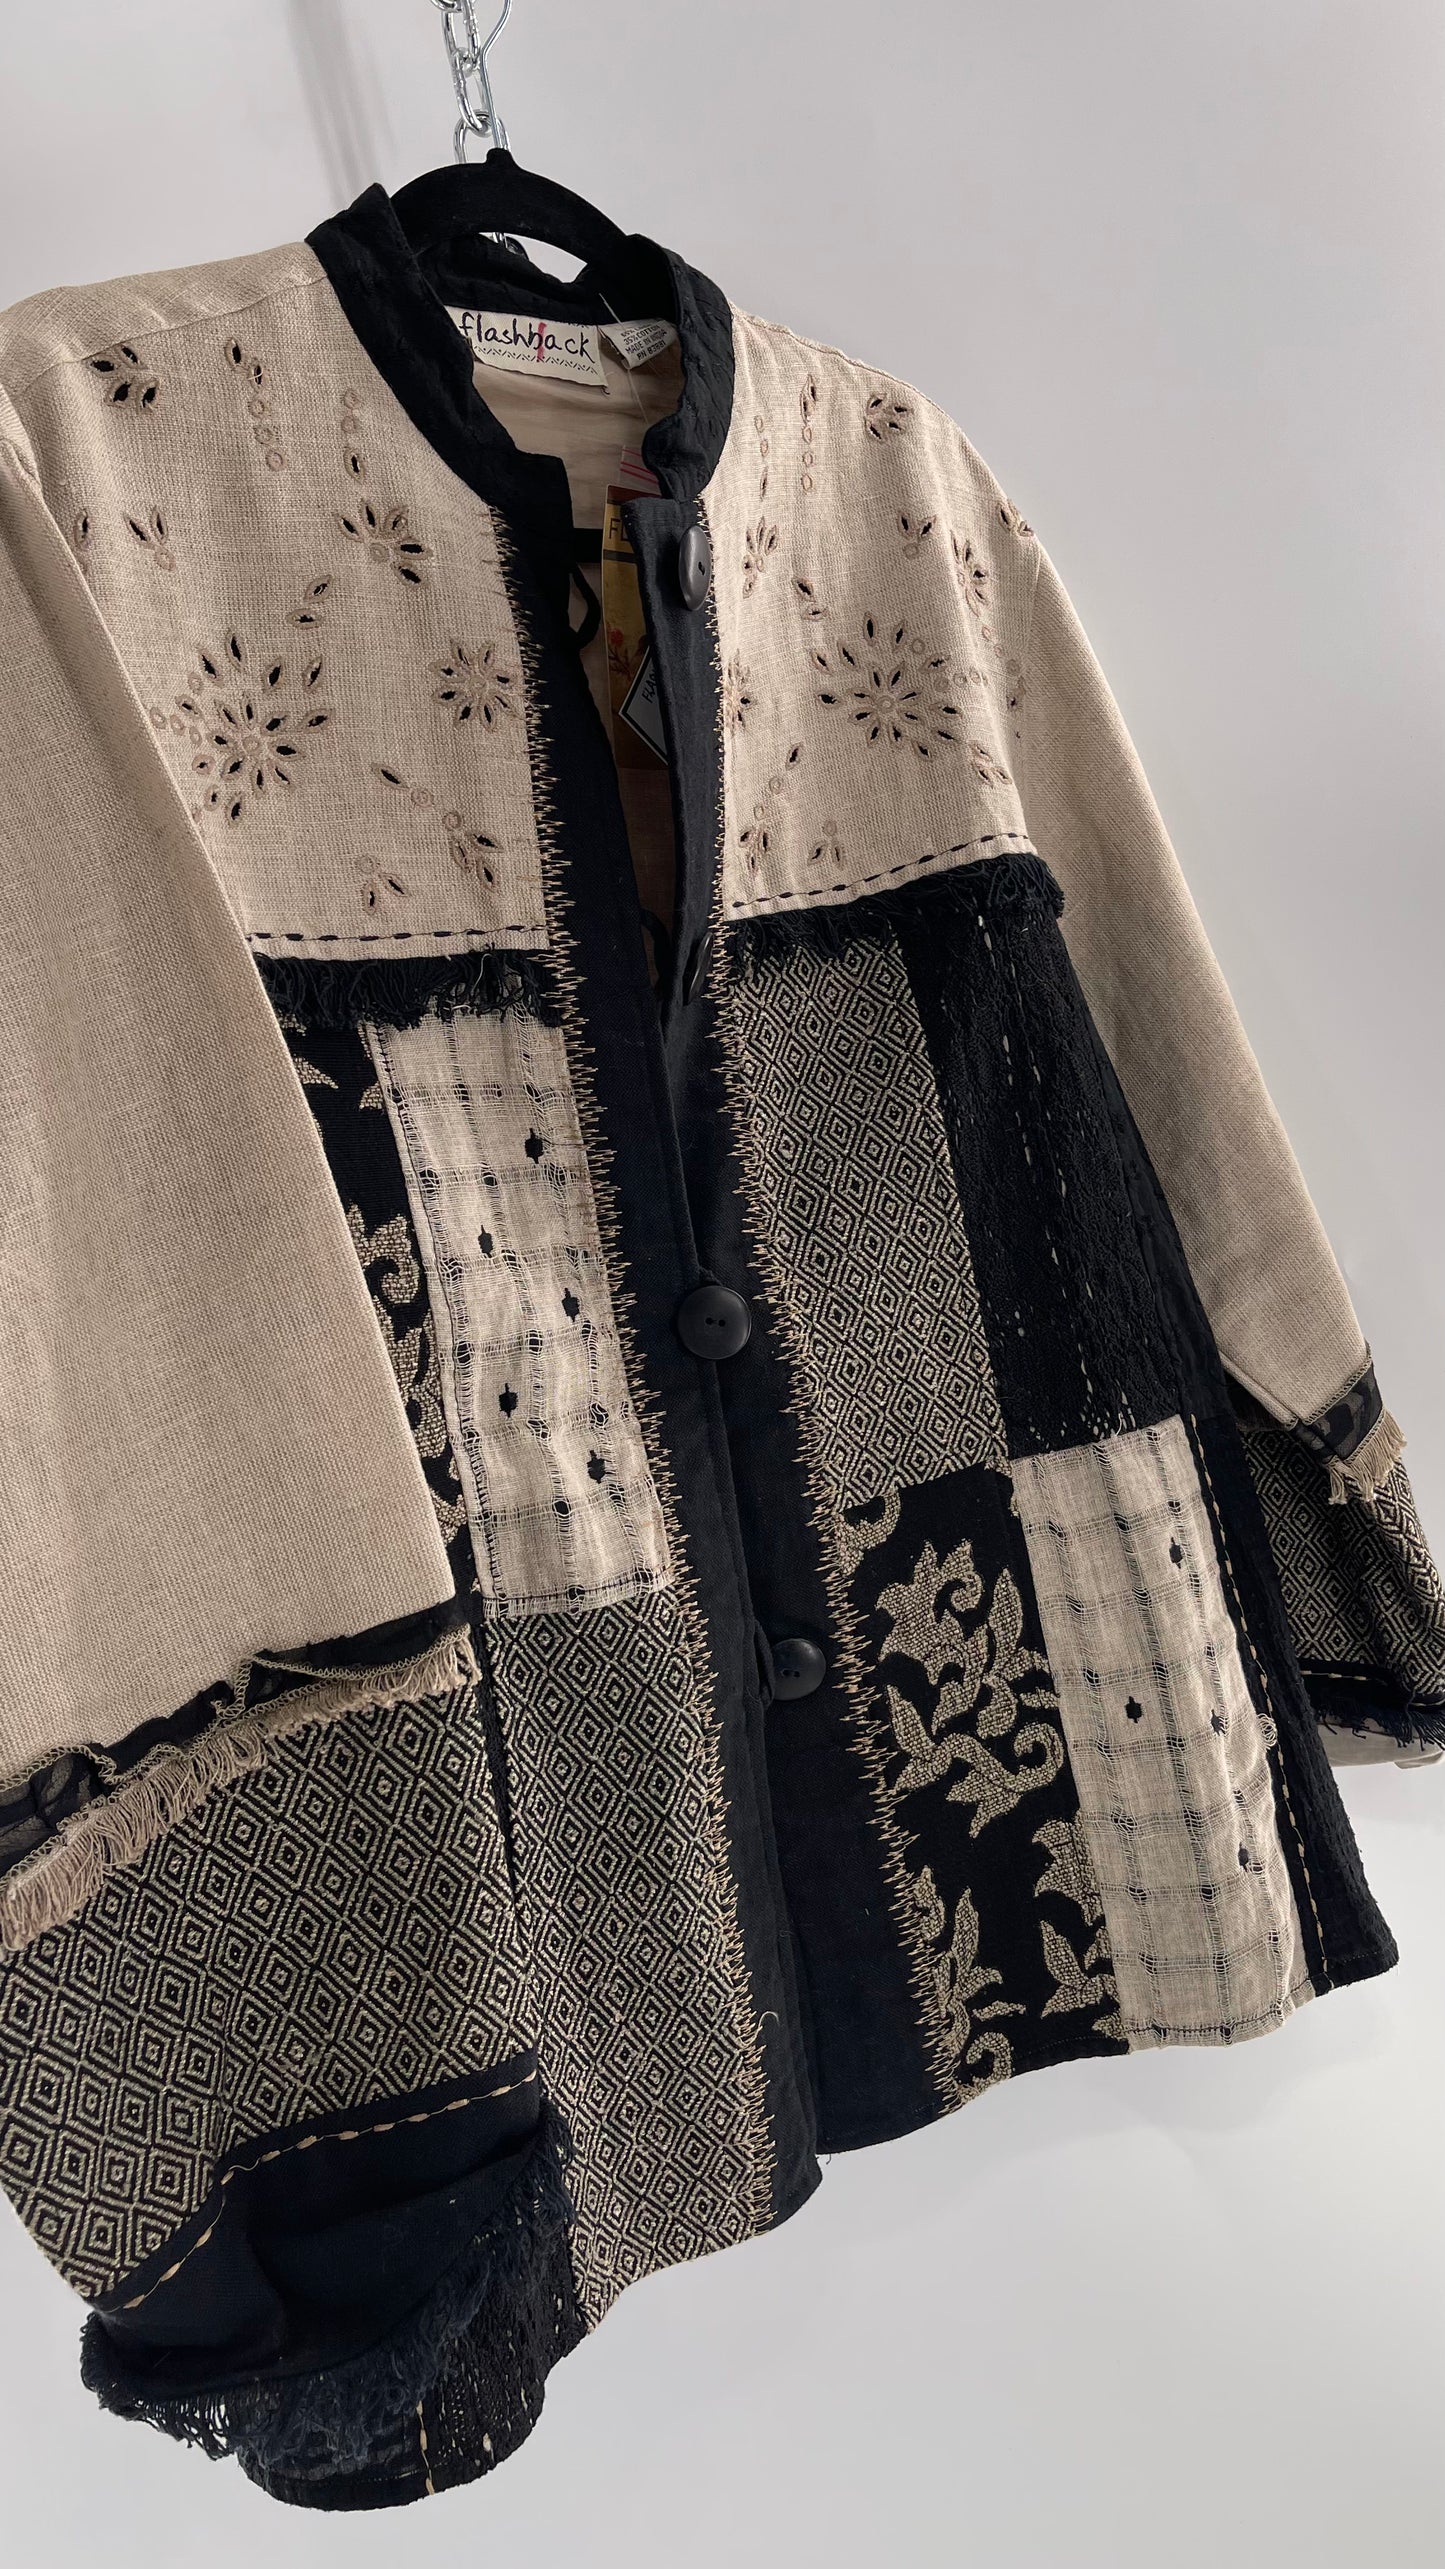 Deadstock Vintage Flashback Patchwork Coat with Mixed Neutral Fabrics, Embroidery and Fringe Details (Large)